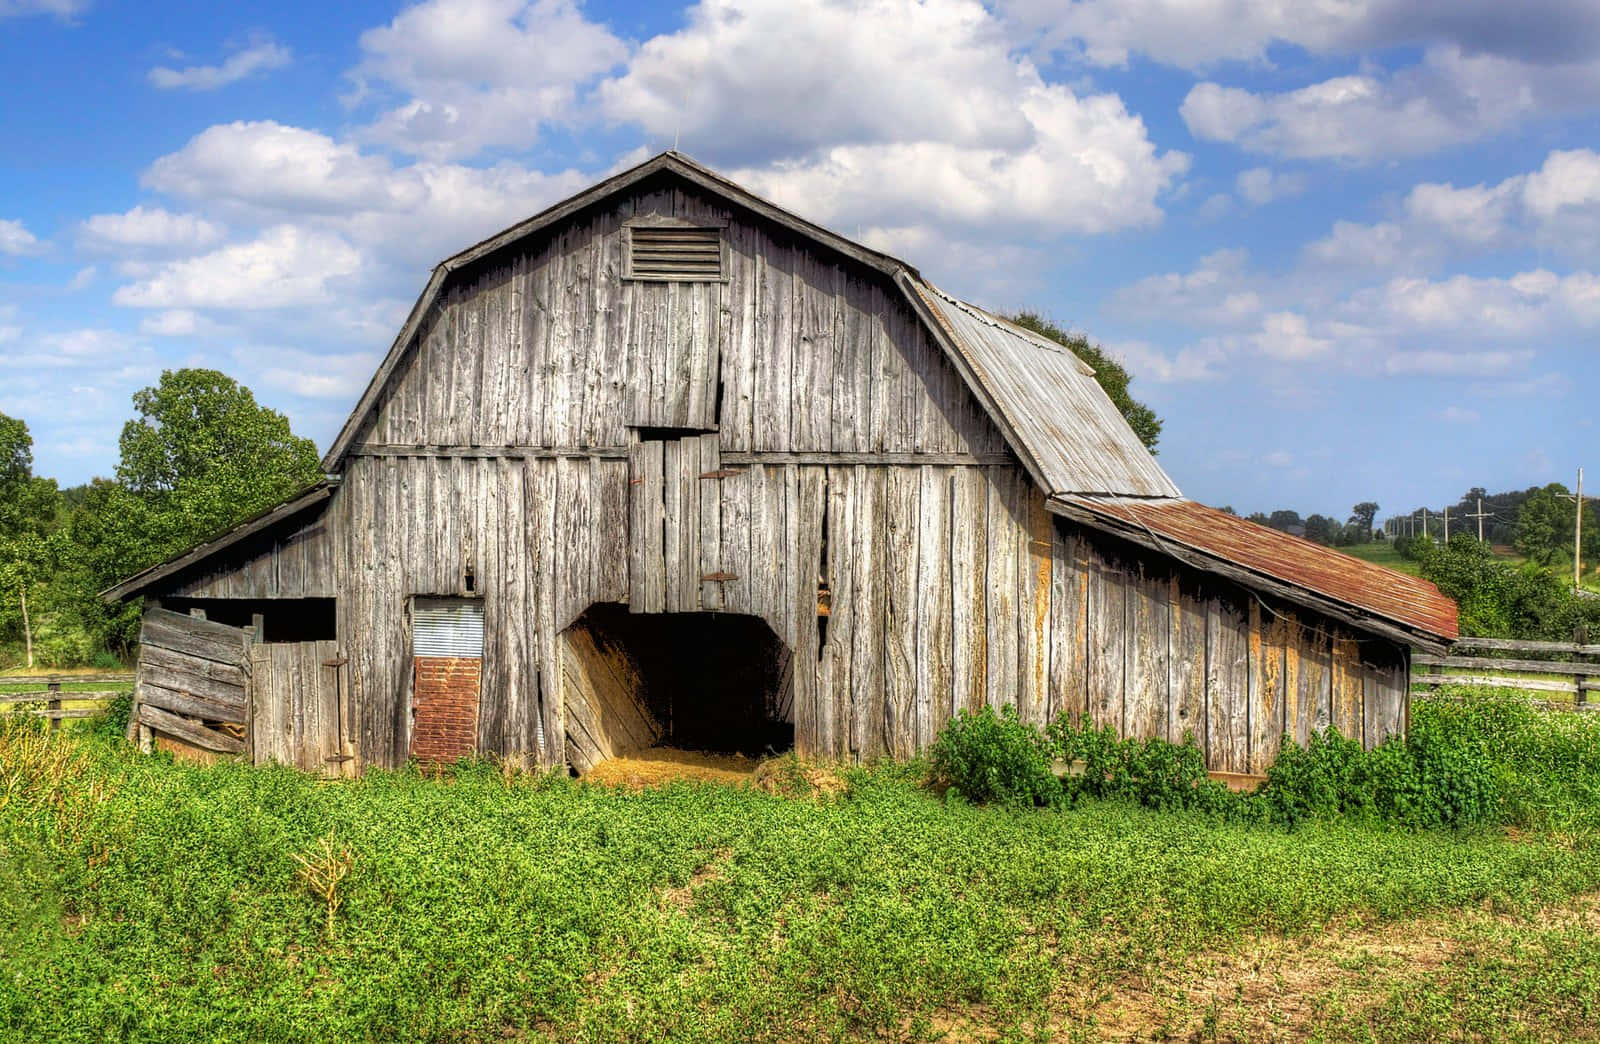 Rustic Old Barn Storage For Hay Wallpaper